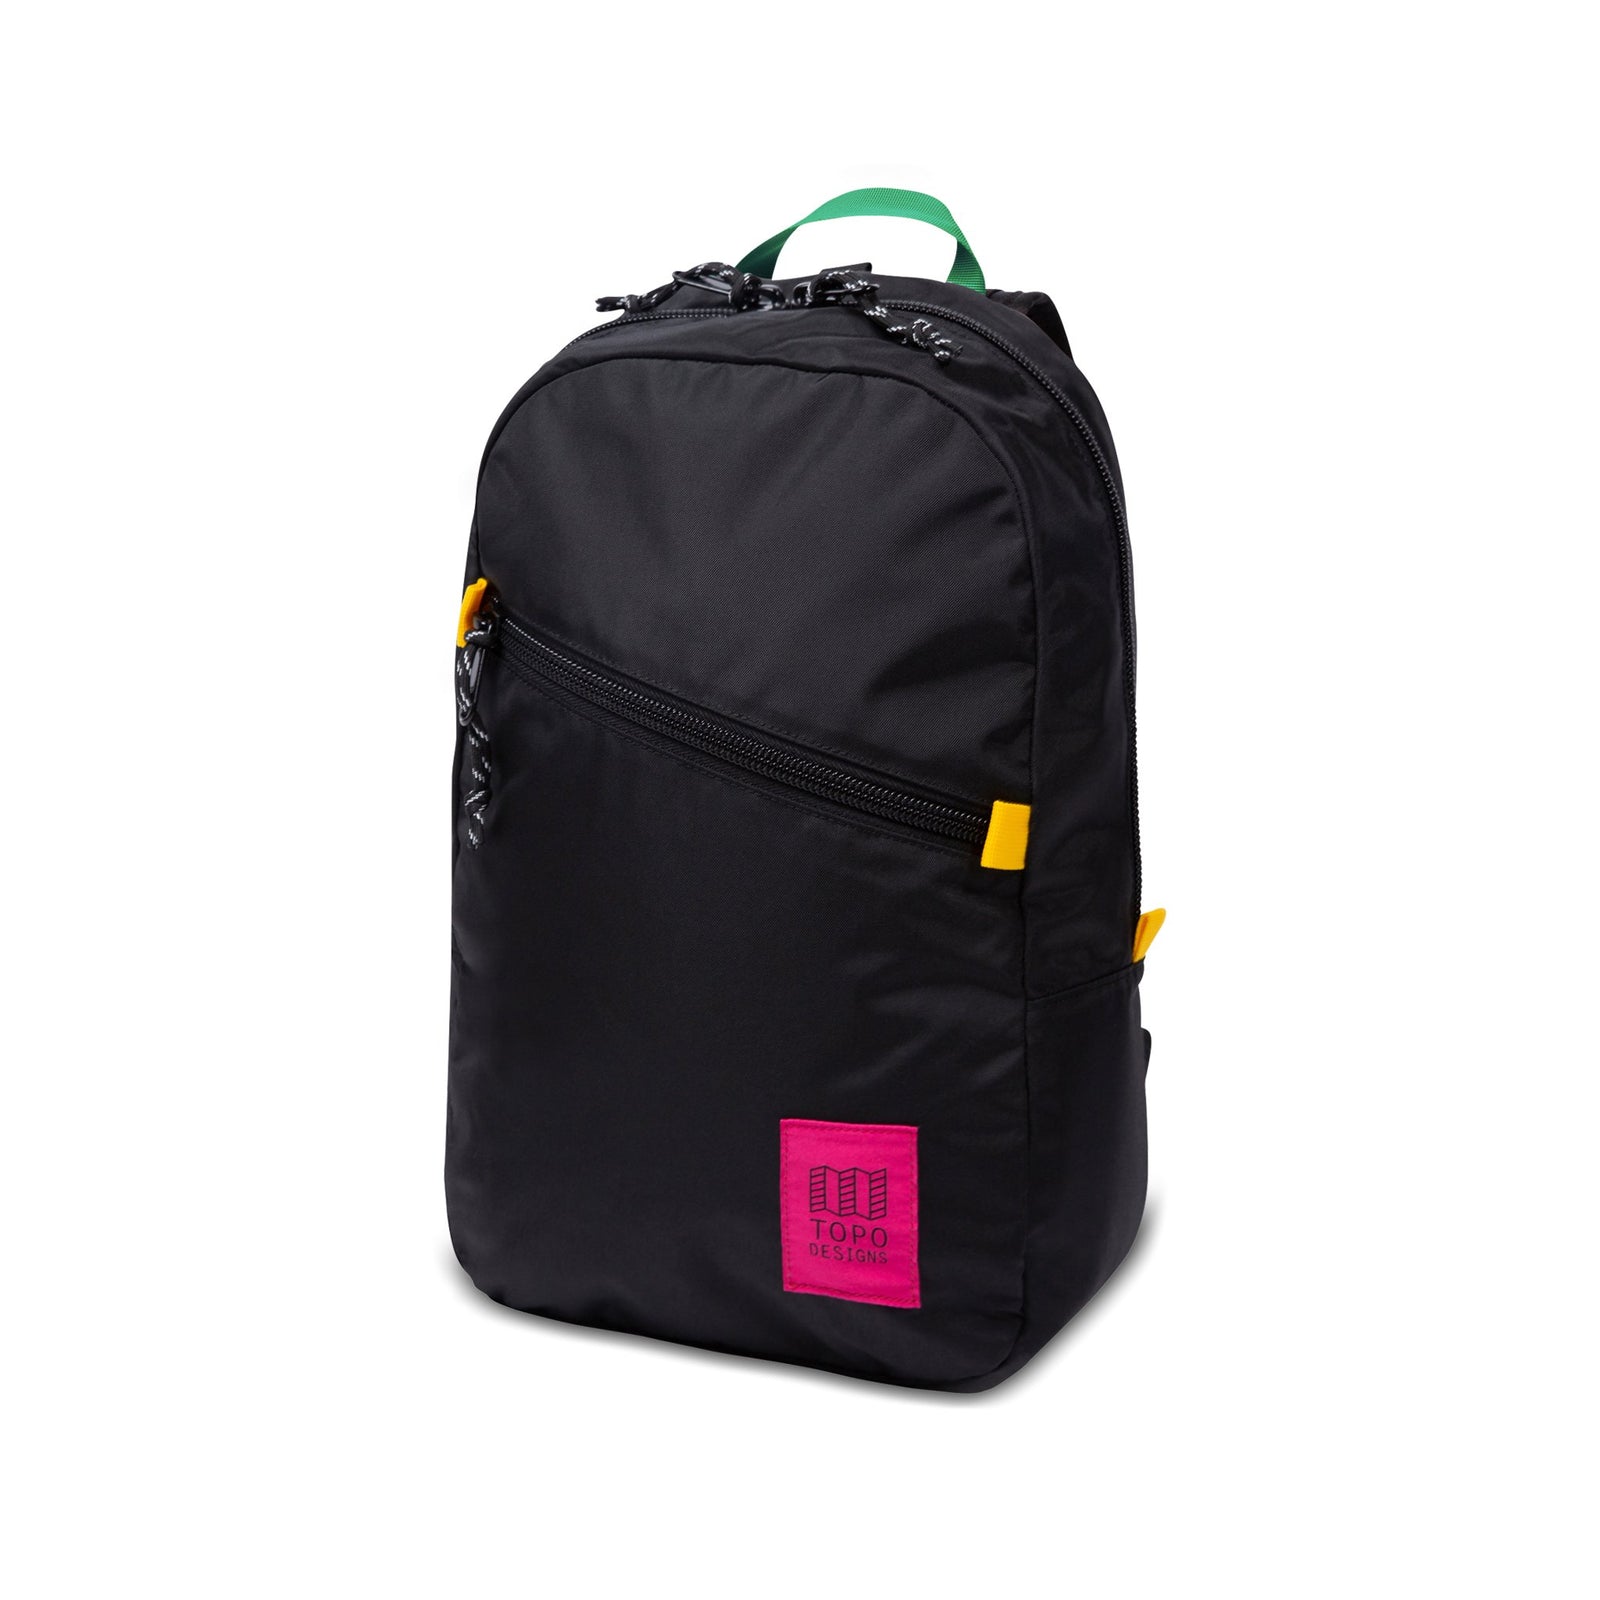 Topo Designs Light Pack laptop backpack in "Black / Neon - Recycled" with Neon Pink label and accents.